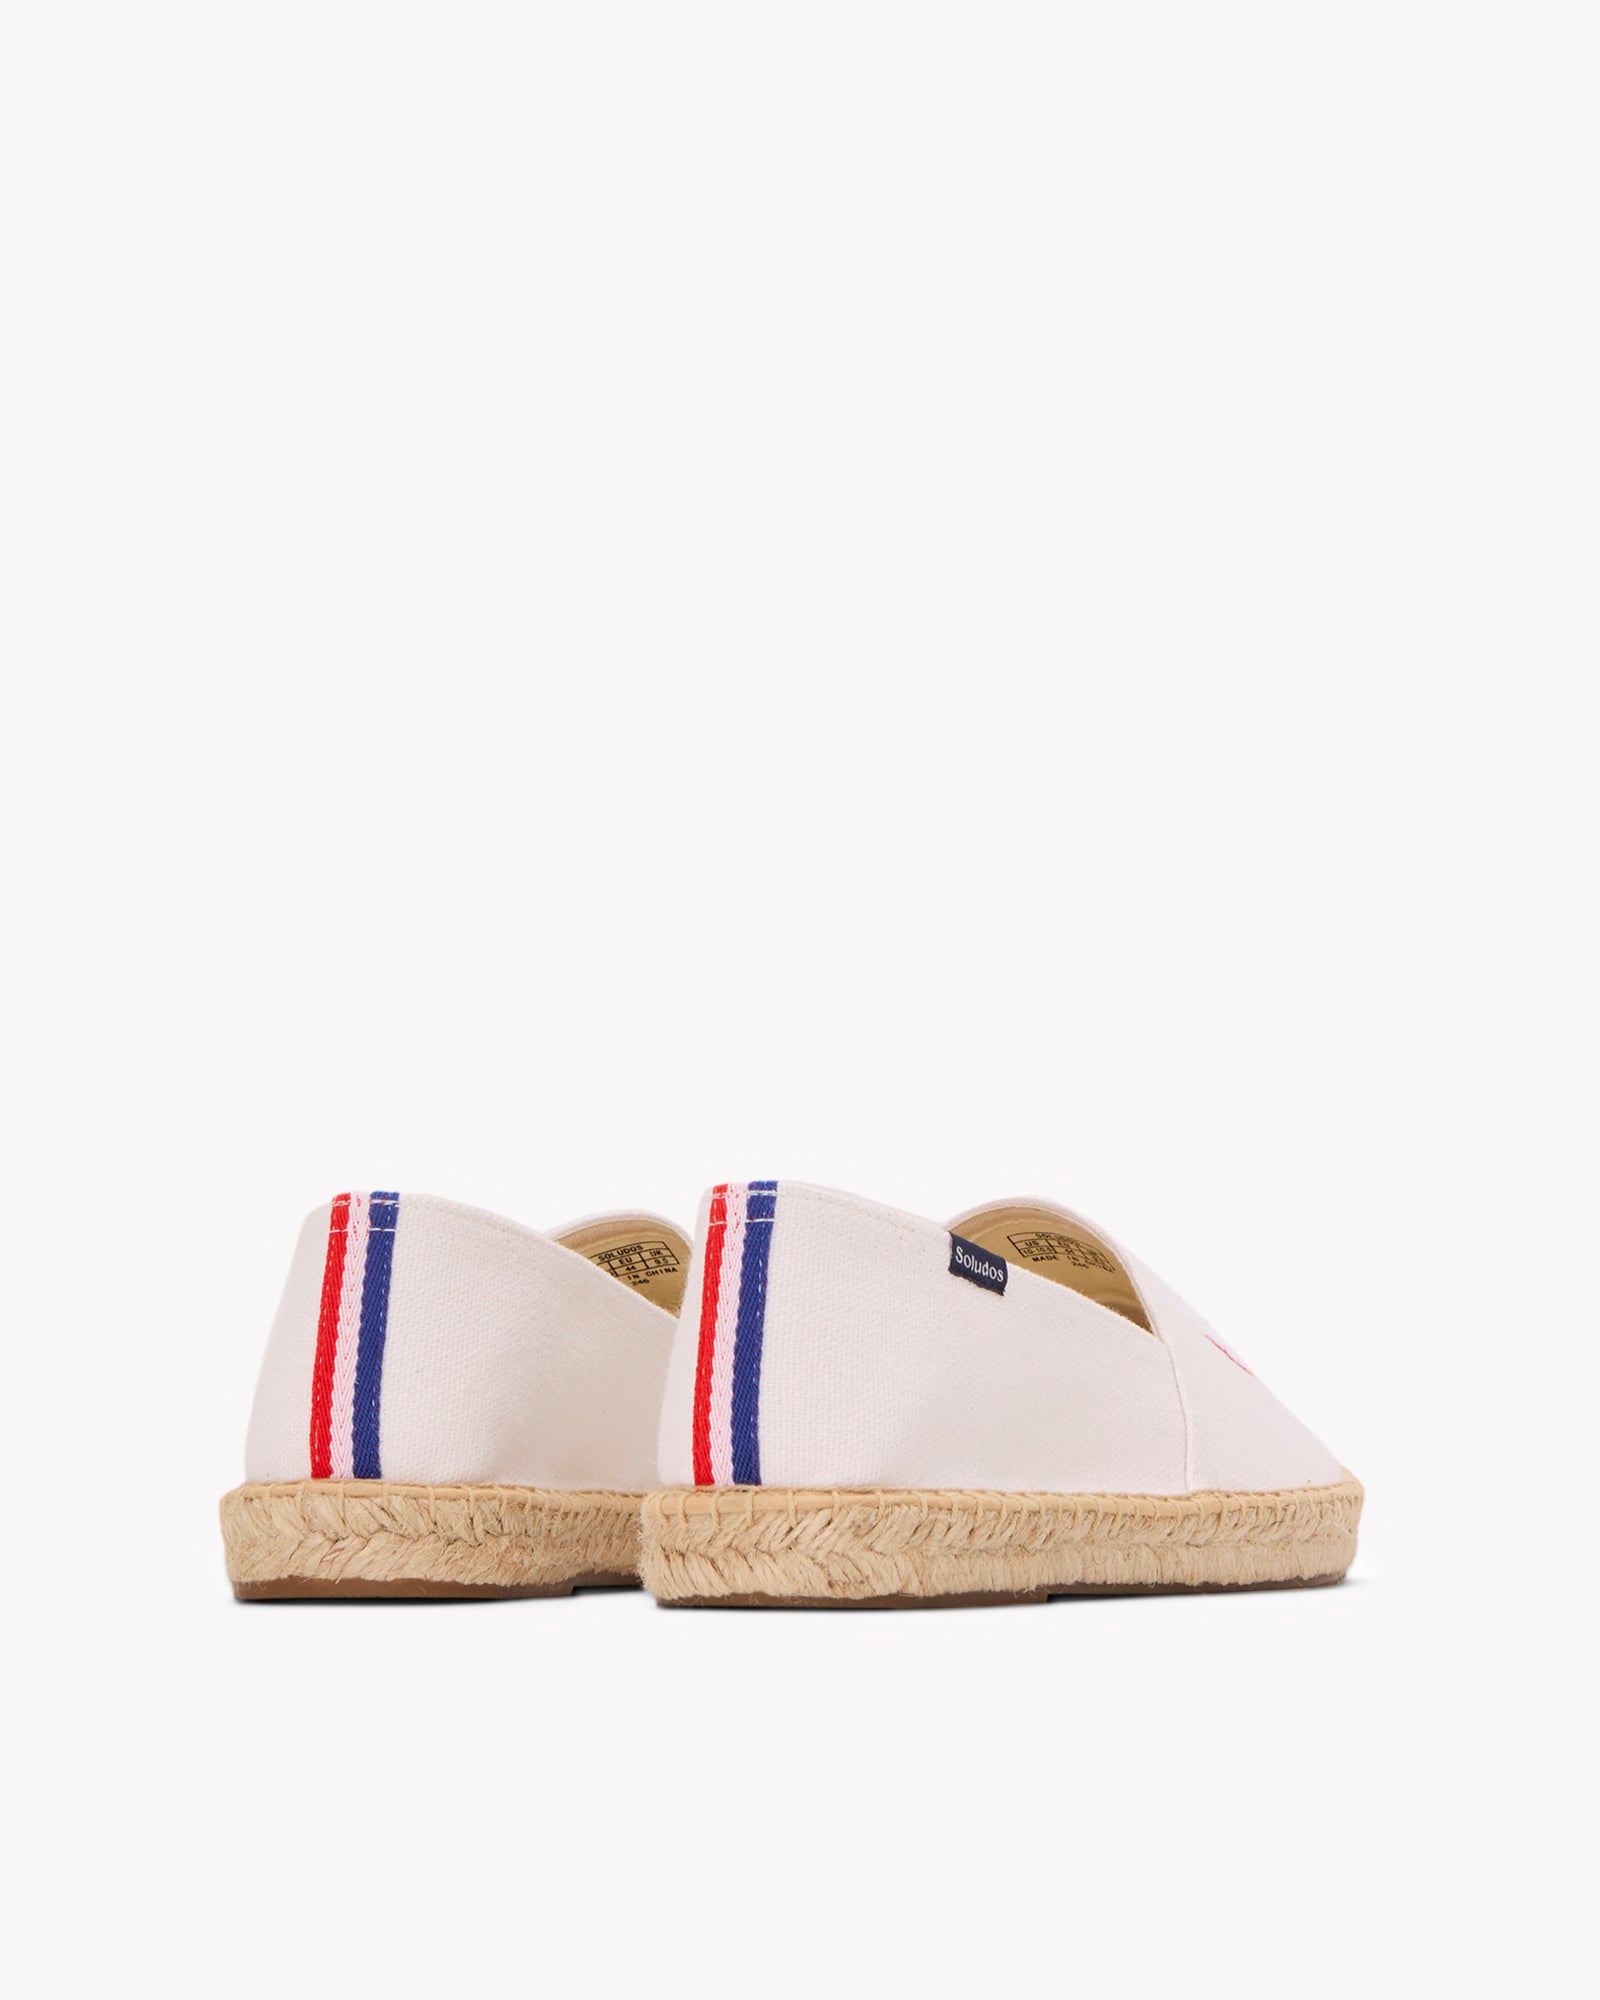 Angled back view of men's USA embroidery espadrille in white with blue and red embroidery